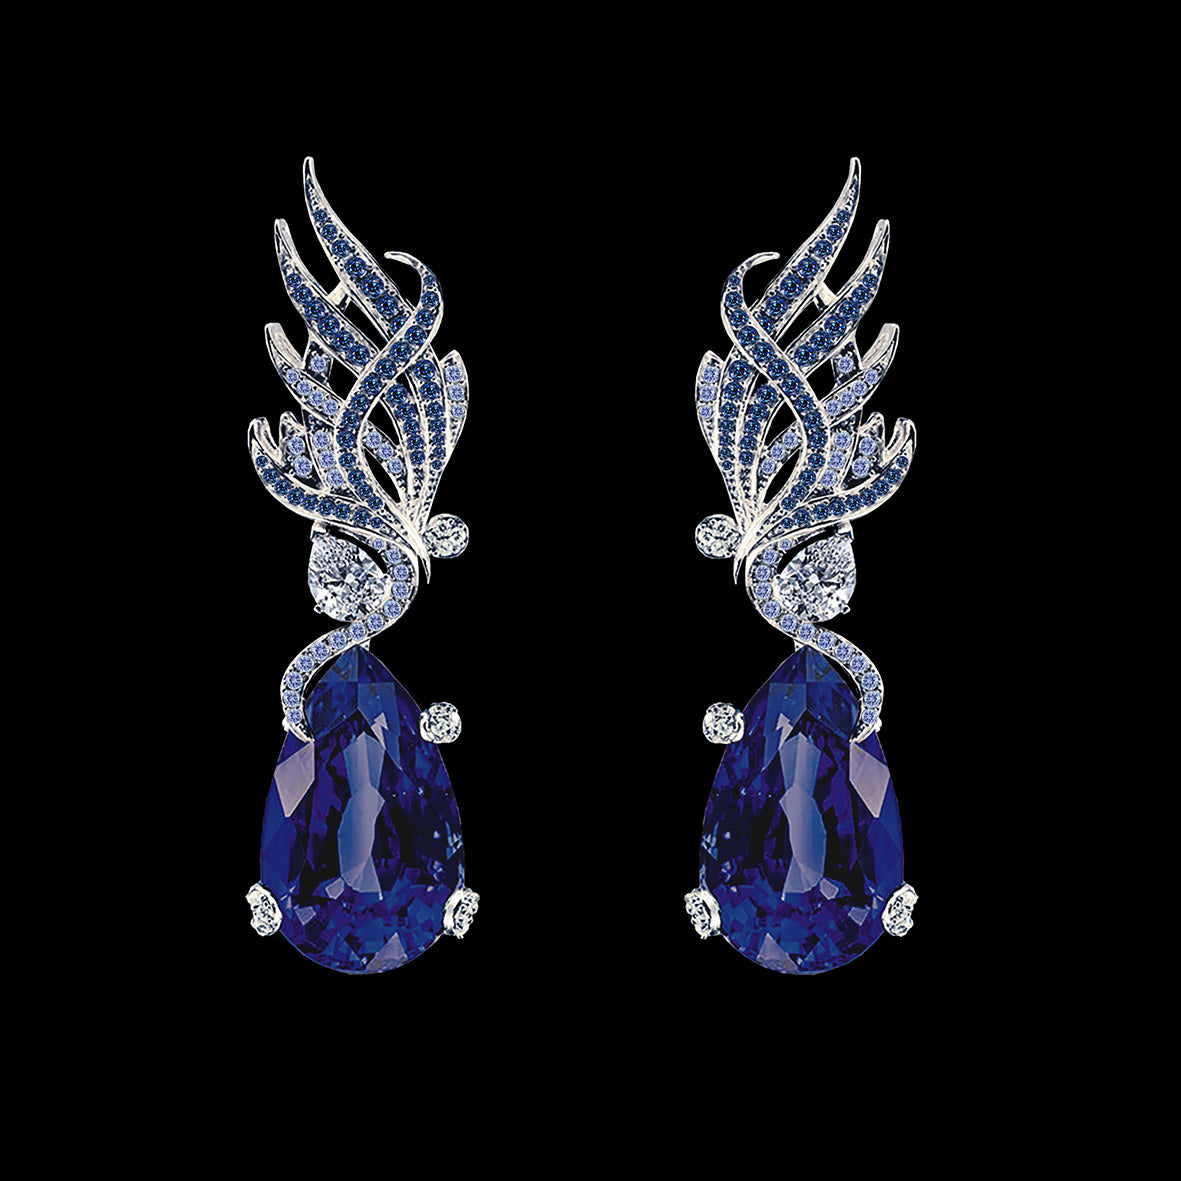 Sapphire Feather Earrings, Earring, Anabela Chan Joaillerie - Fine jewelry with laboratory grown and created gemstones hand-crafted in the United Kingdom. Anabela Chan Joaillerie is the first fine jewellery brand in the world to champion laboratory-grown and created gemstones with high jewellery design, artisanal craftsmanship and a focus on ethical and sustainable innovations.